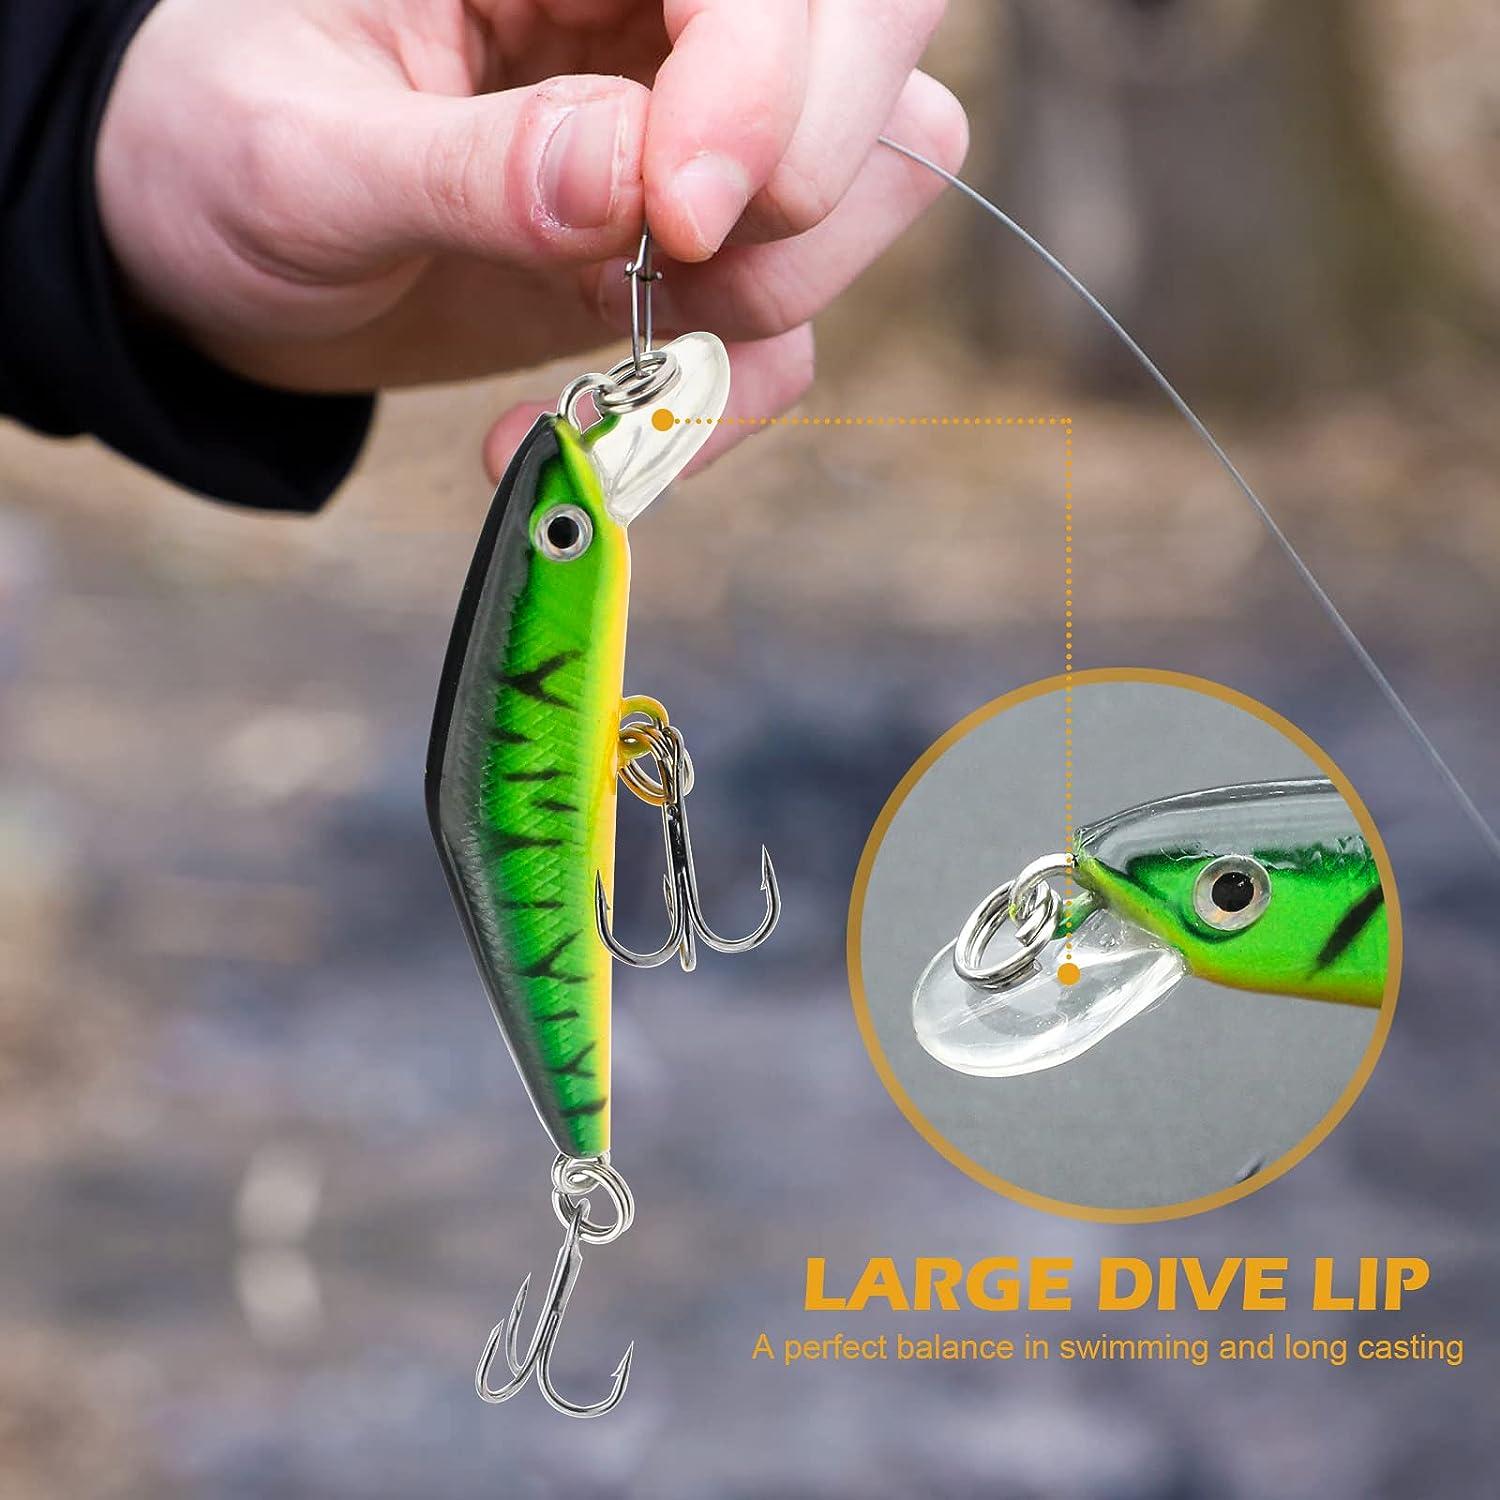 Fishing Lures, Minnow Popper Crank Baits Pencil Bass Trout Fishing Lures  with Hooks, Topwater Artificial Hard Swimbaits for Saltwater Freshwater  Trout Walleye Blueback Salmon Catfish A-10pc,2.68,0.1oz